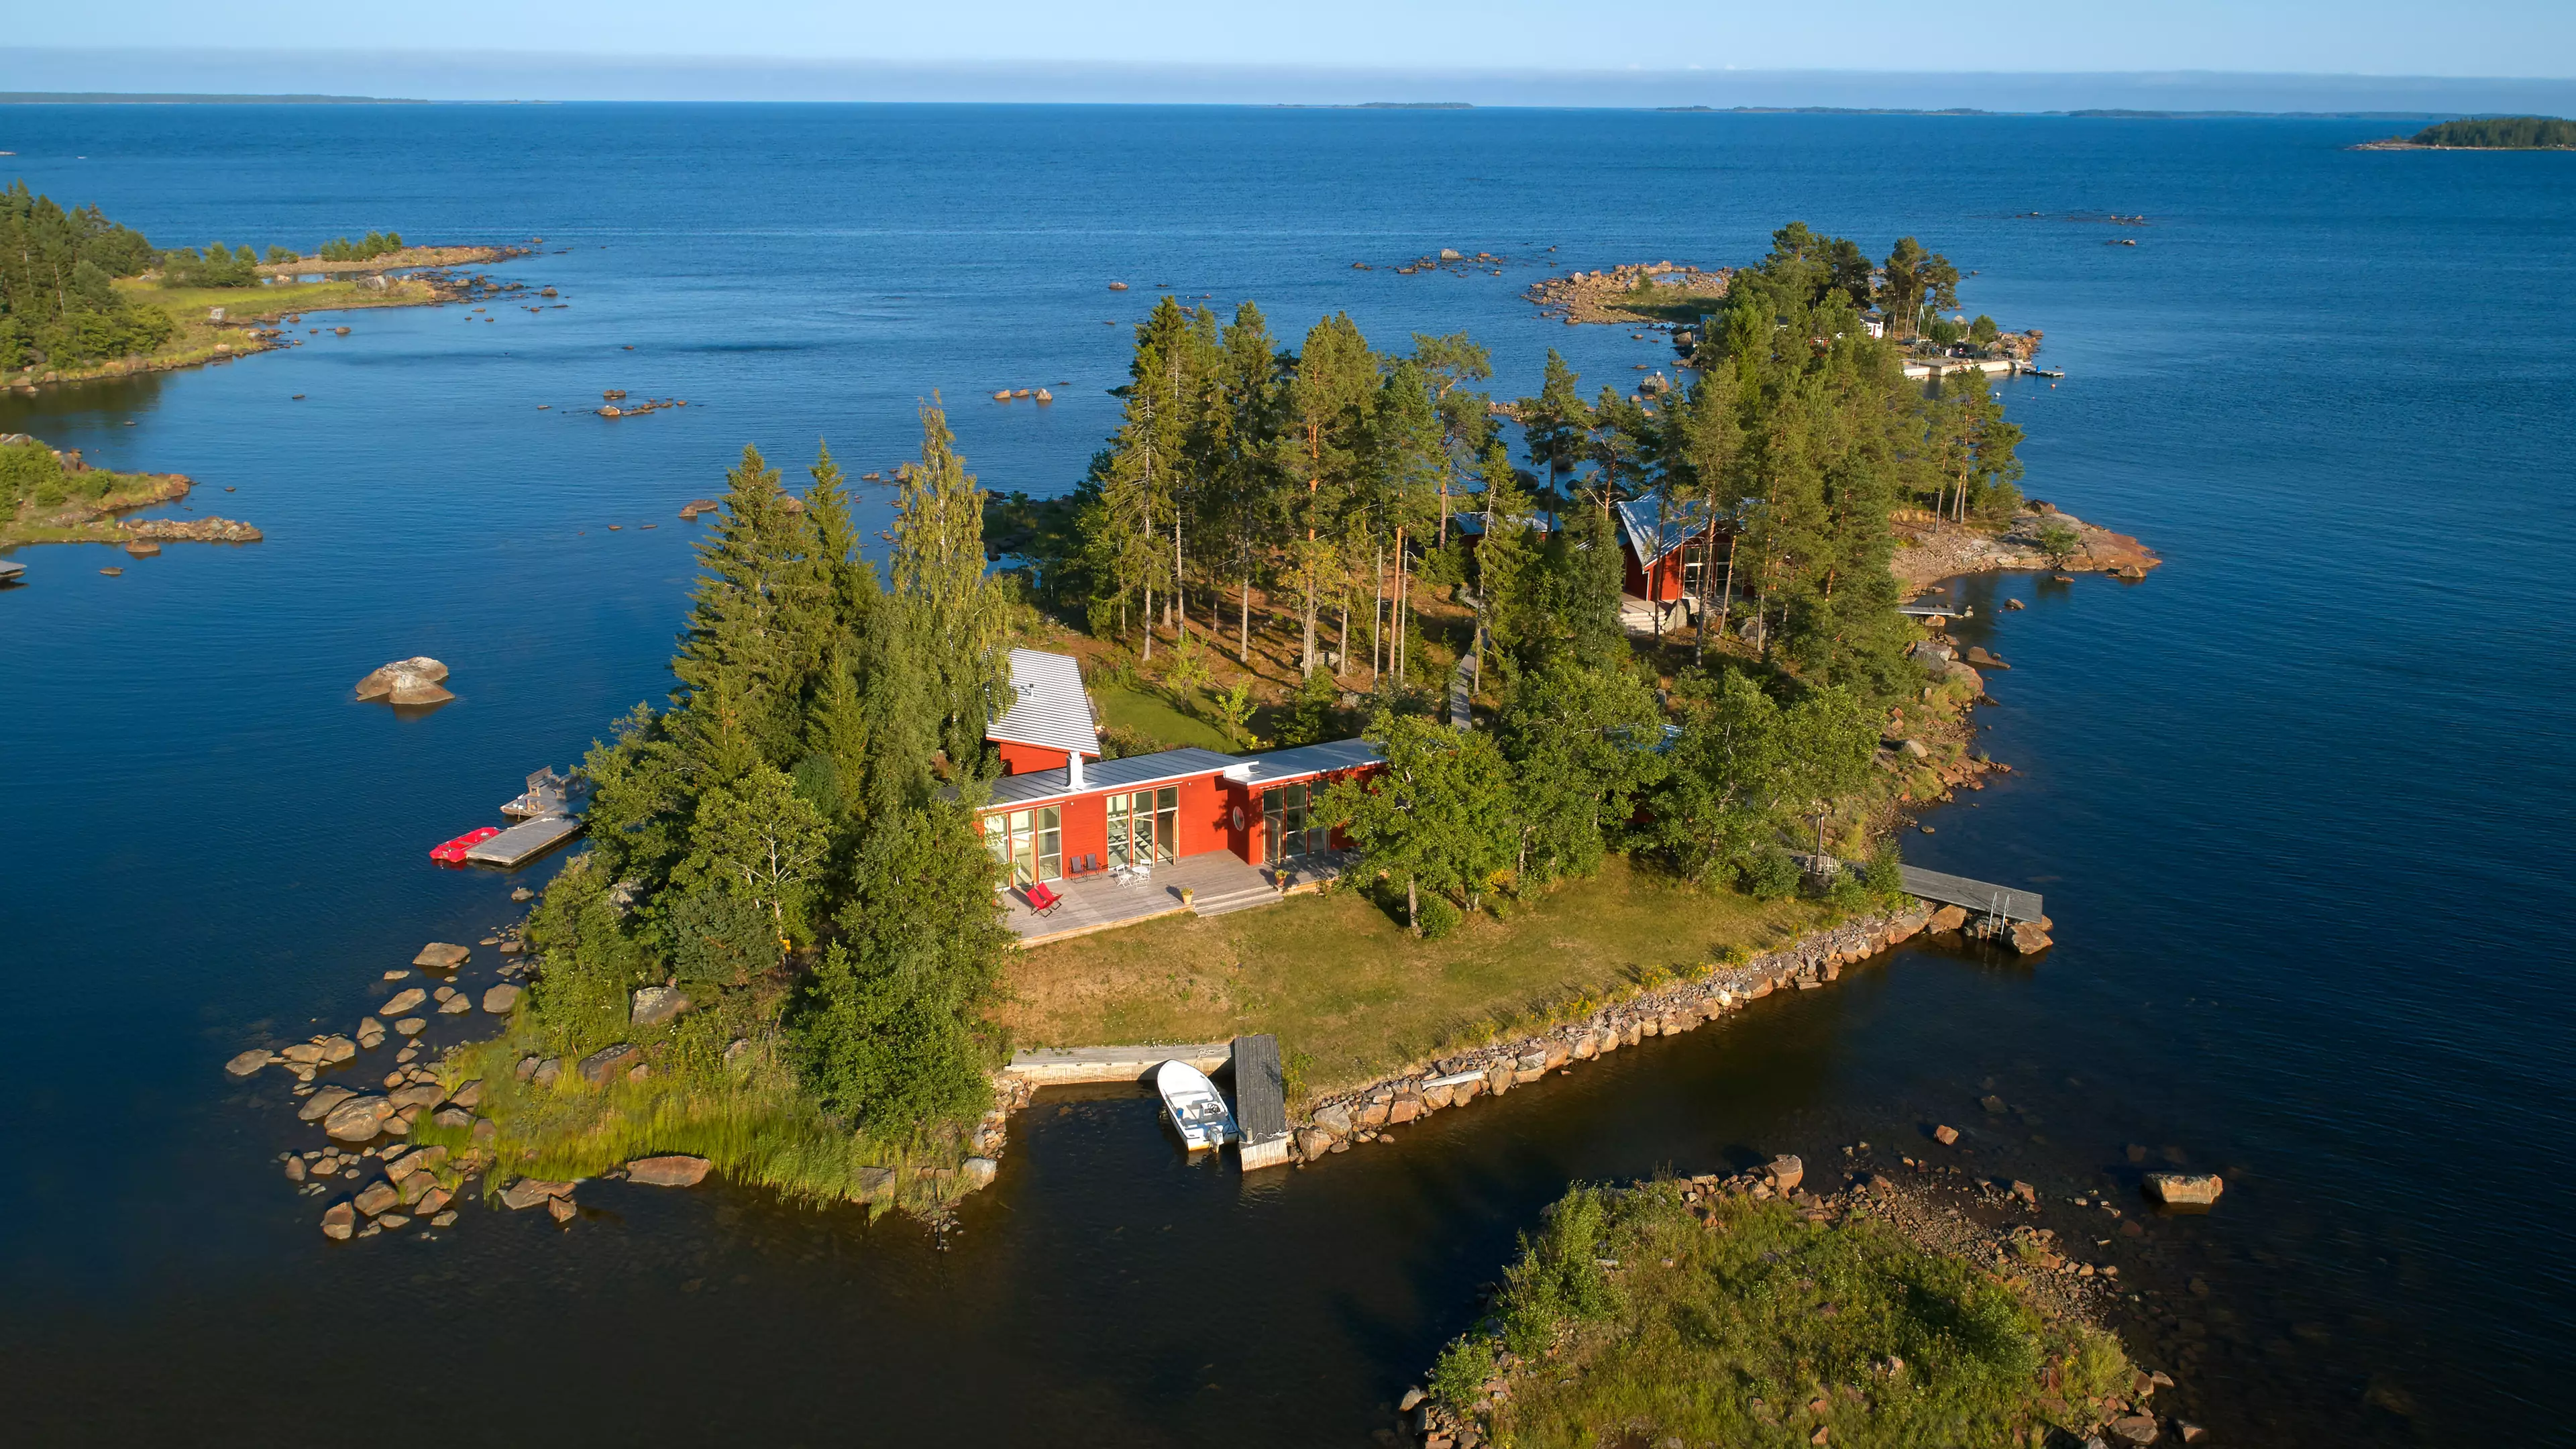 This Private Island Could Be Yours For The Same Price As A London House